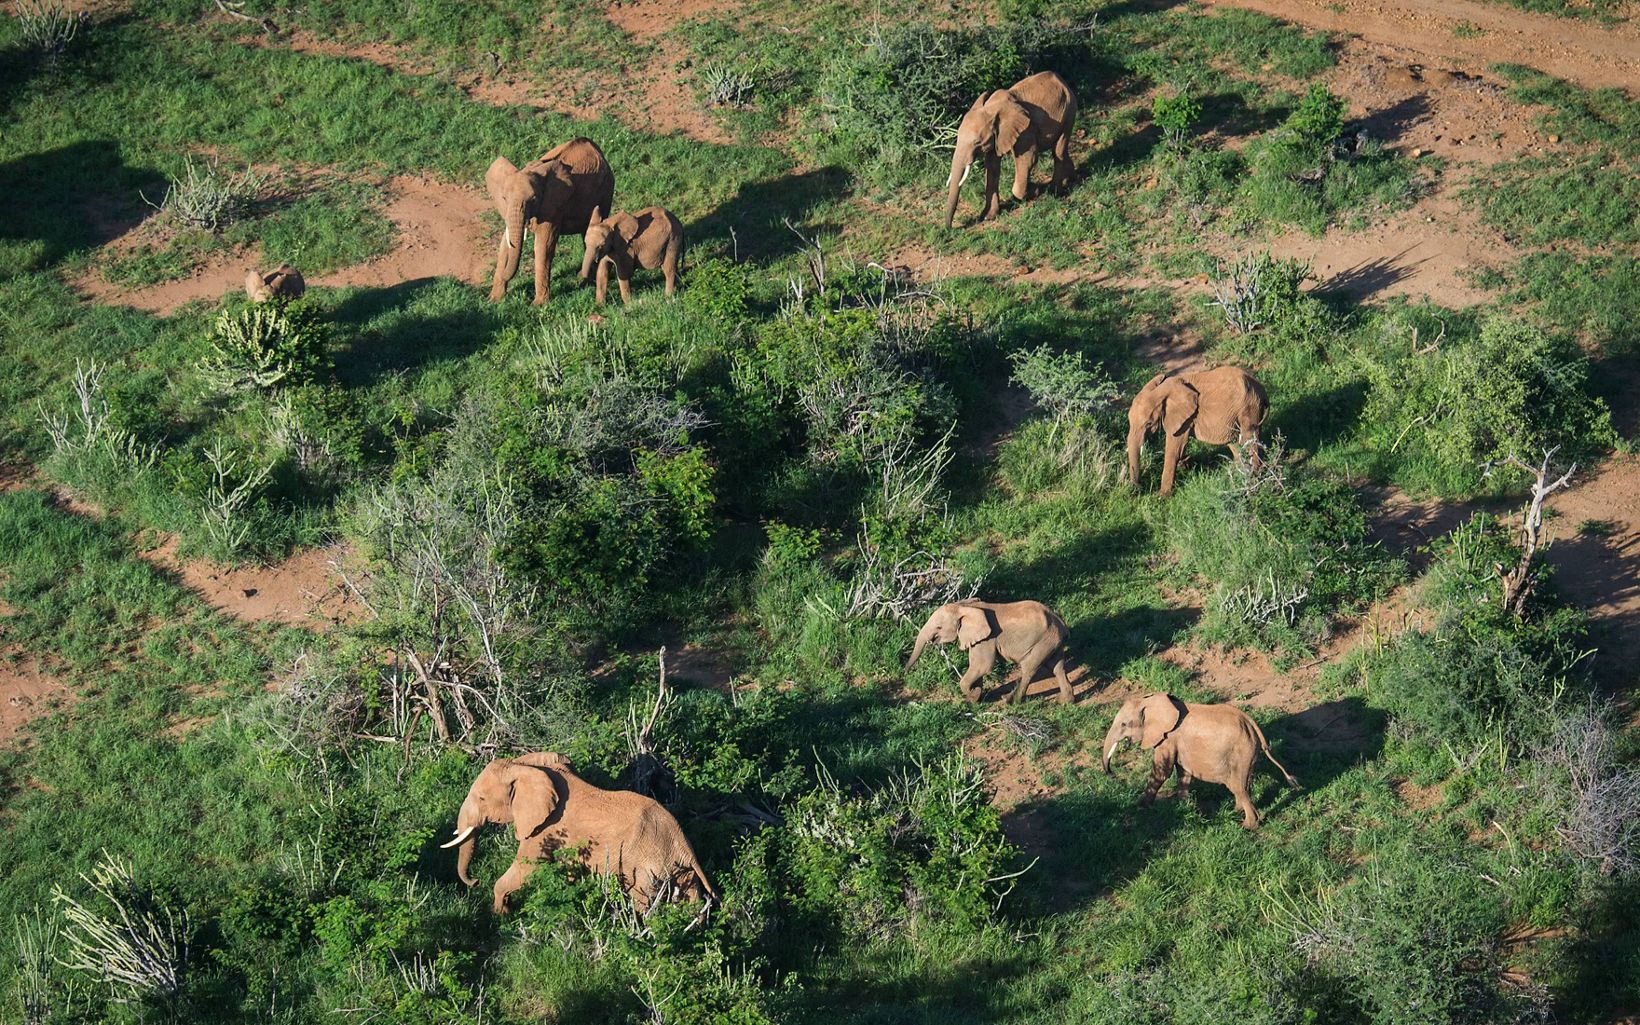 
                
                  Providing Safe Places The Nature Conservancy is working with local partners to protect large, intact landscapes. Securing wildlife corridors means more protected habitat for African elephants.
                  © Ami Vitale
                
              